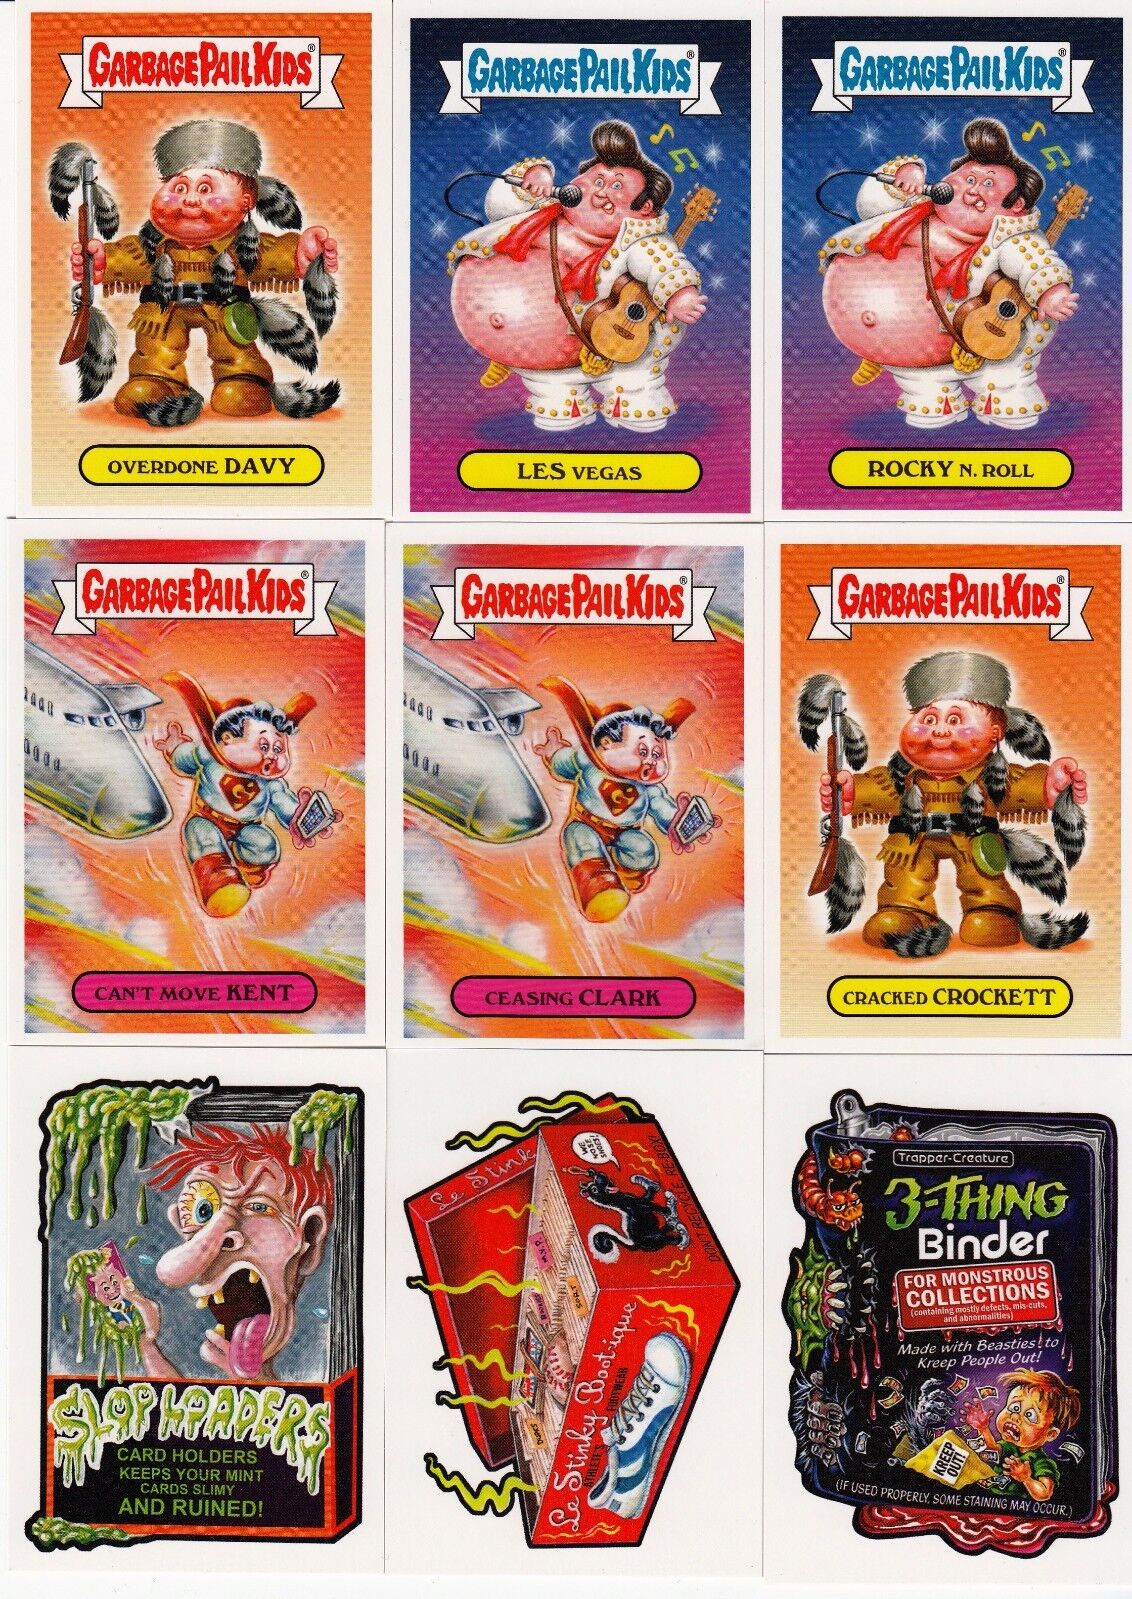 GARBAGE PAIL KIDS WACKY PACKAGES PHILLY SHOW PROMO SET LIMITED TO 300 SETS RARE